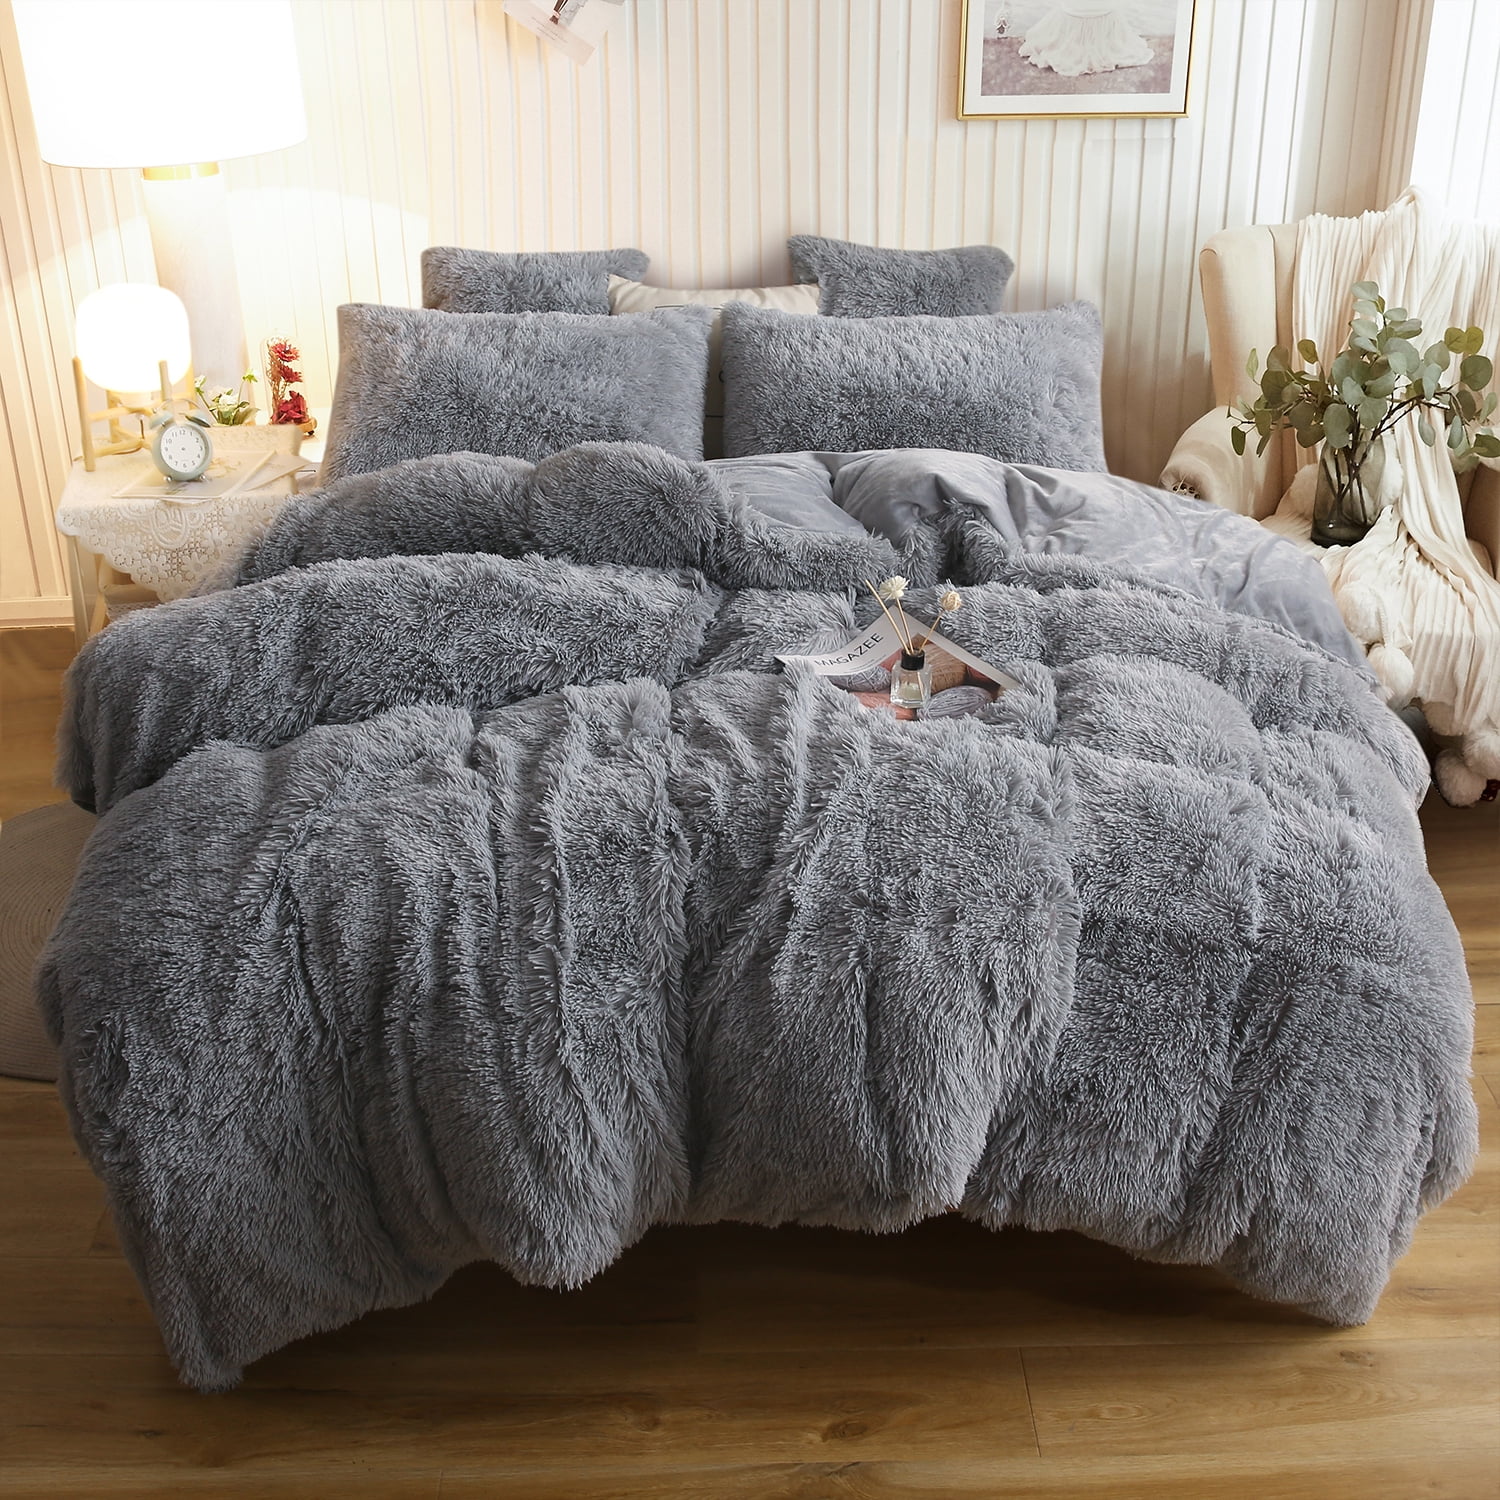 XeGe 3 Piece Fluffy Faux Fur Duvet Cover Set Queen, Luxury Ultra Soft  Velvet Shaggy Plush Bedding Set, Fuzzy Comforter Cover with 2 Furry Pillow